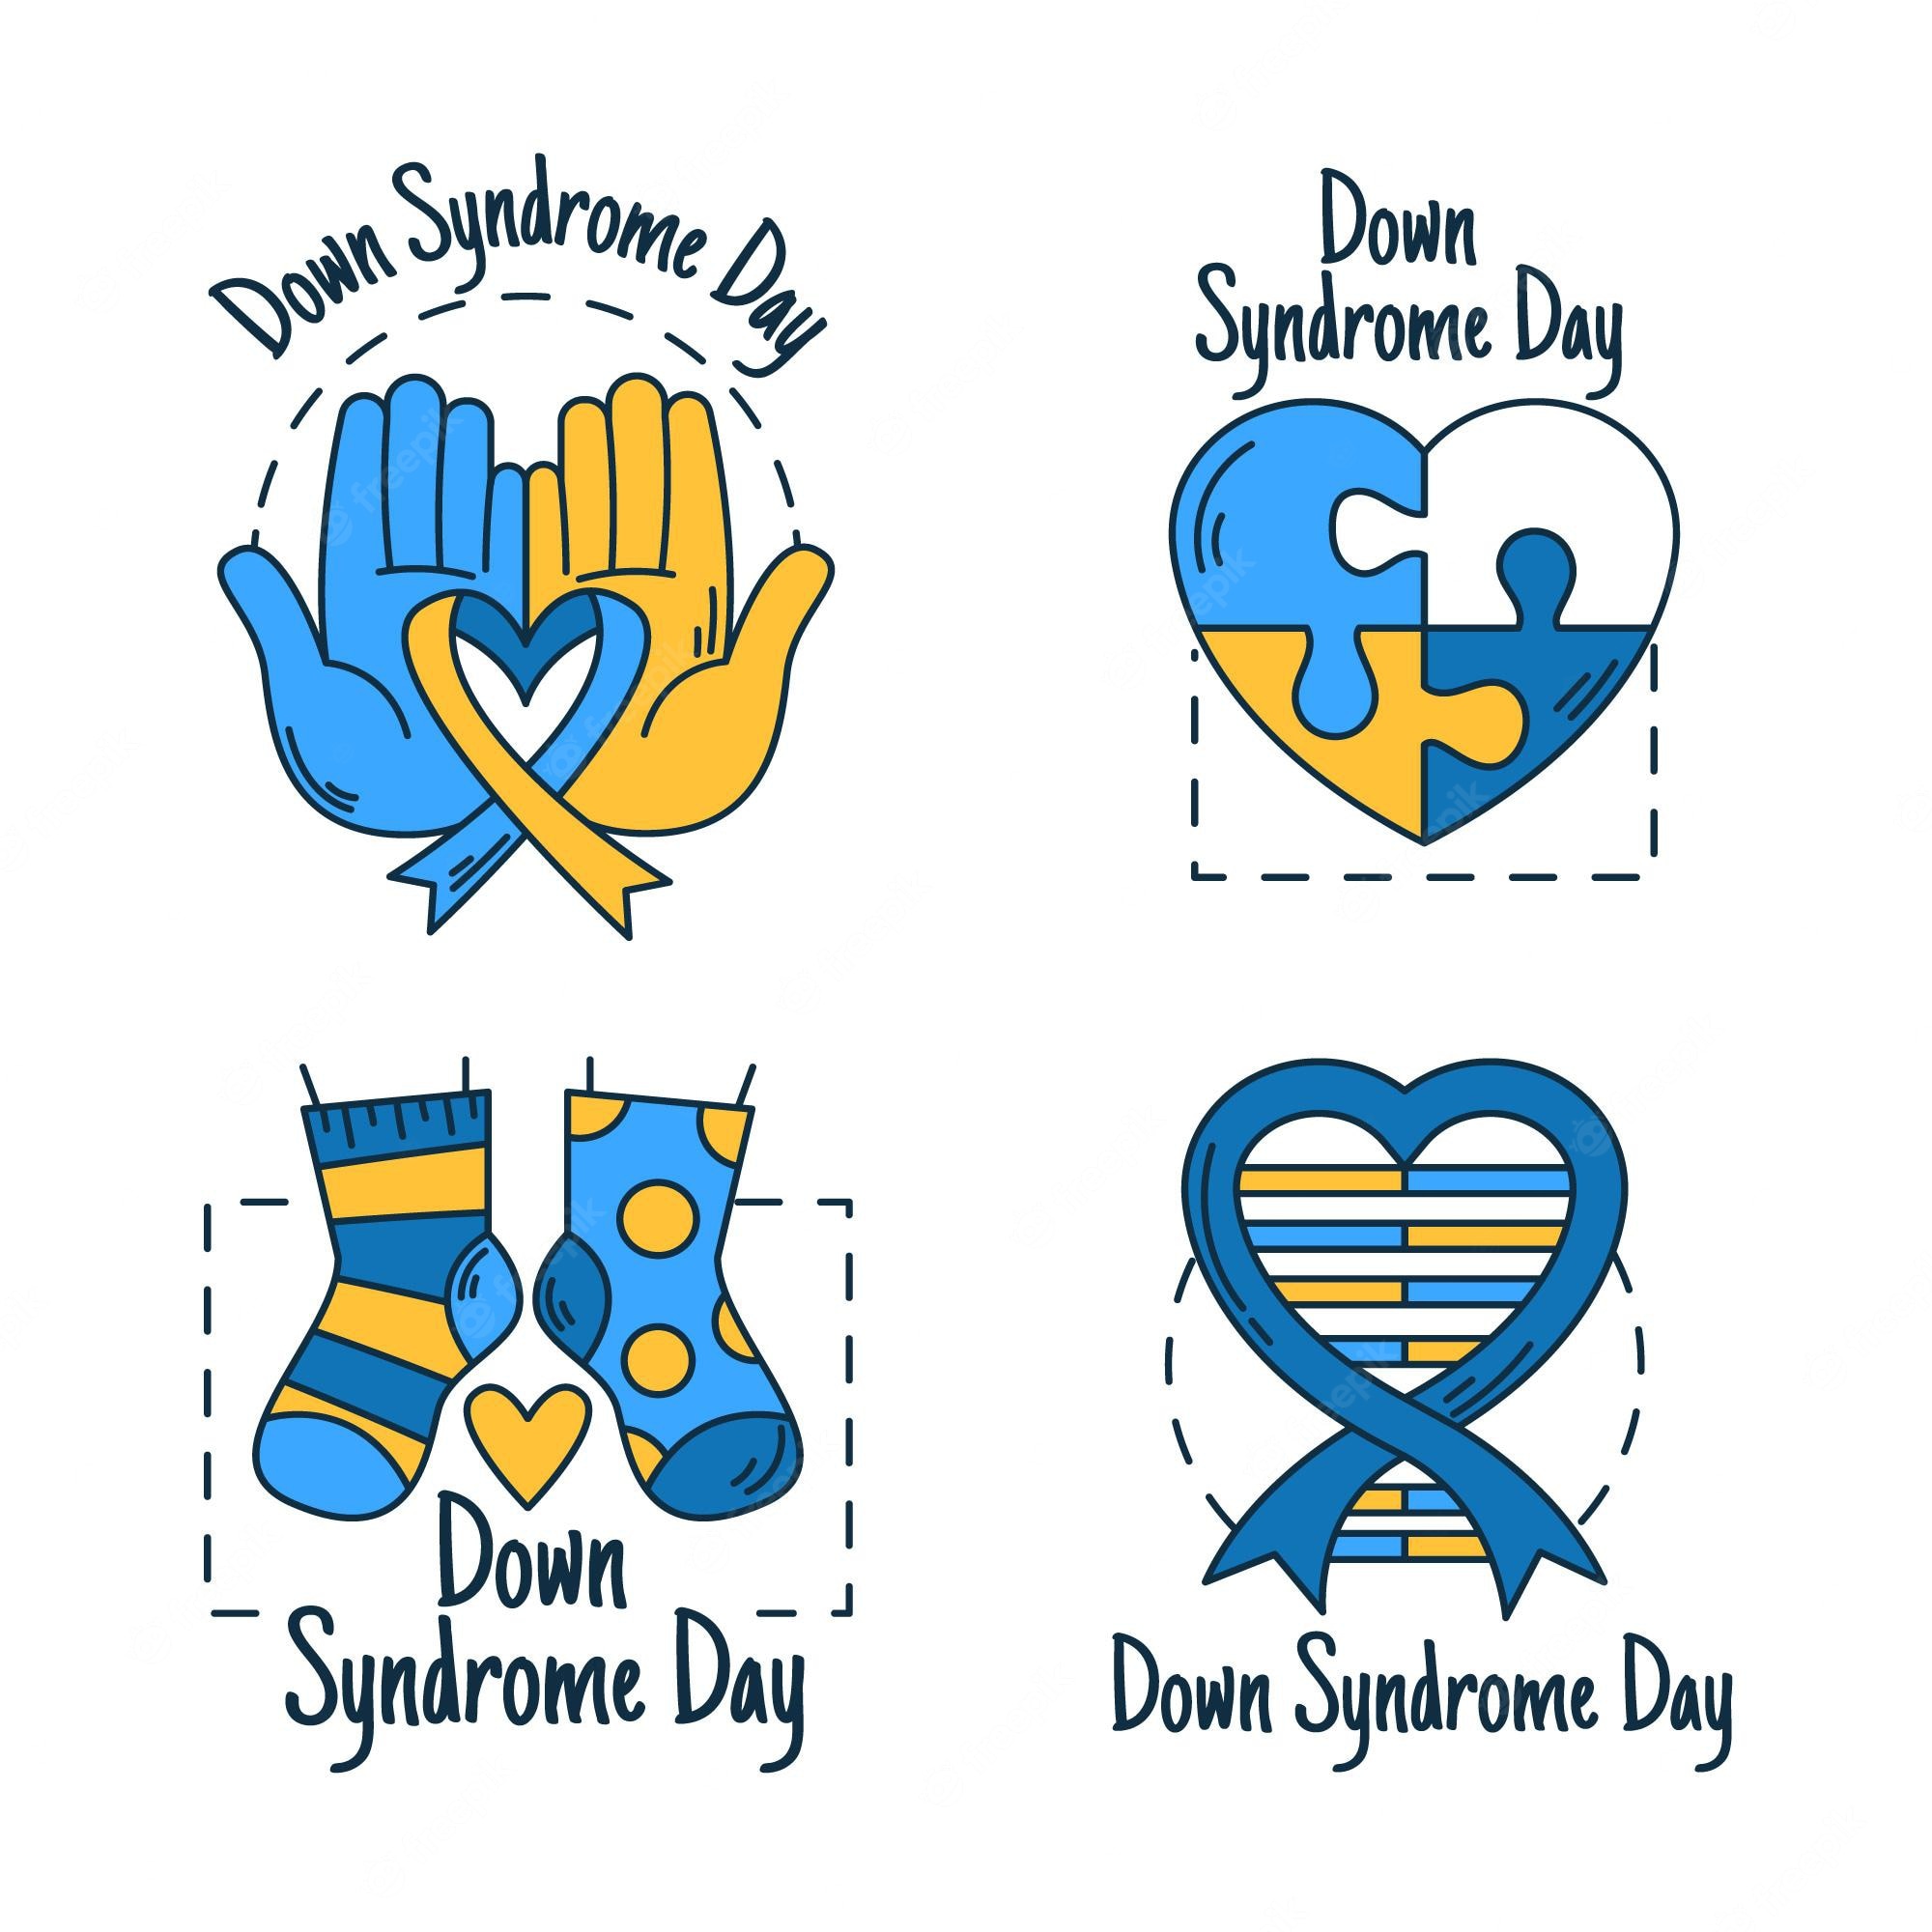 World Down Syndrome Day Wallpapers